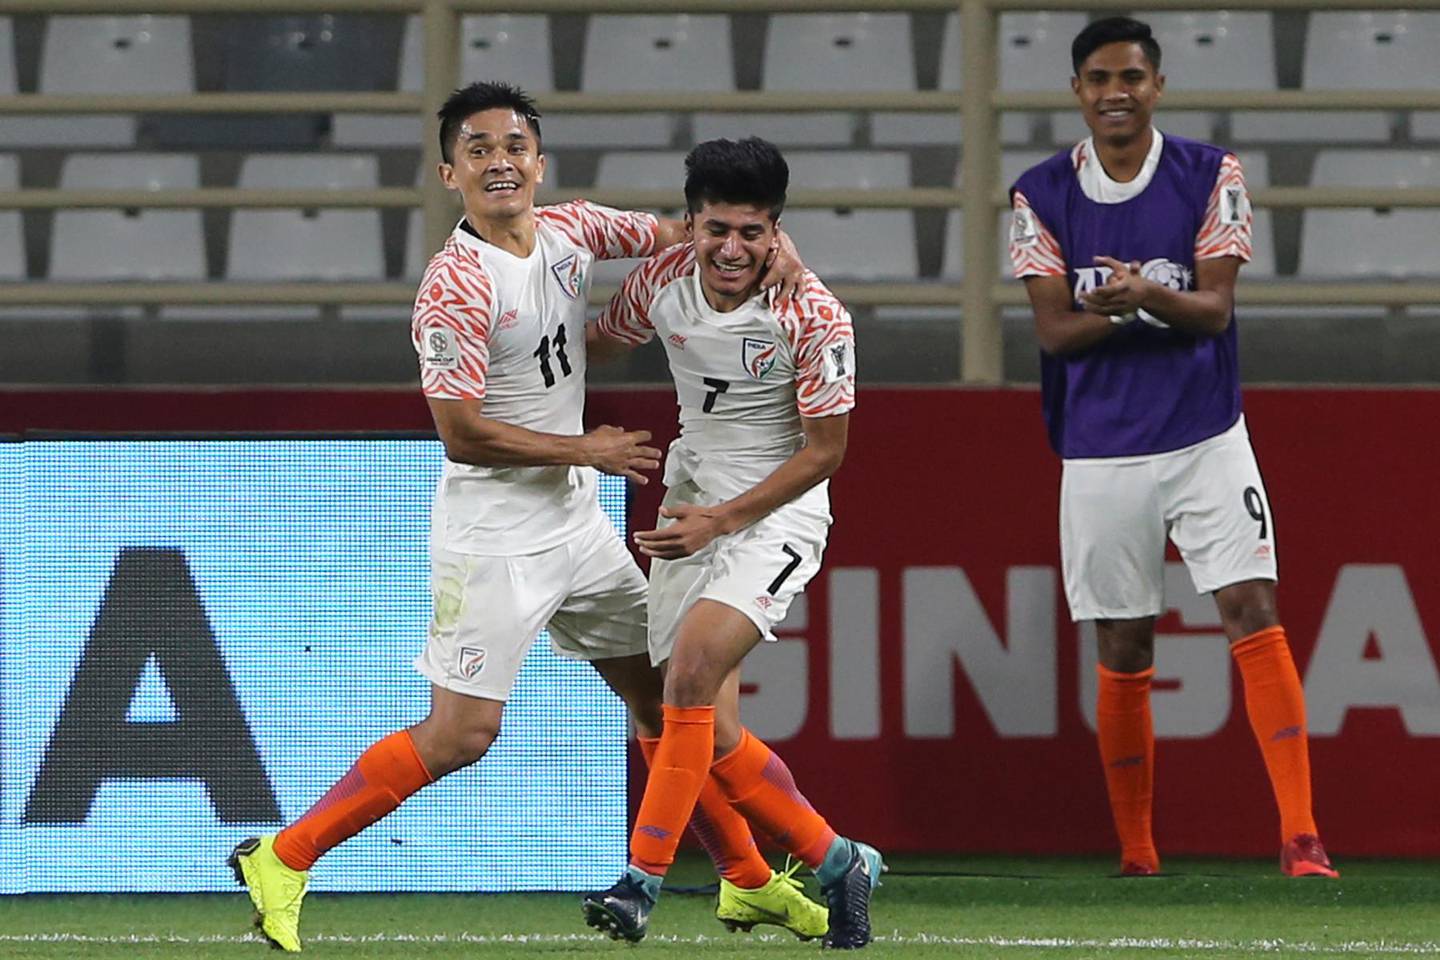 India's forward Sunil Chhetri, left, and India's midfielder Anirudh Thaparight, celebrate their third goal during the AFC Asian Cup group A soccer match between Thailand and India at Al Nahyan Stadium in Abu Dhabi, United Arab Emirates, Sunday, Jan. 6, 2019. (AP Photo/Kamran Jebreili)